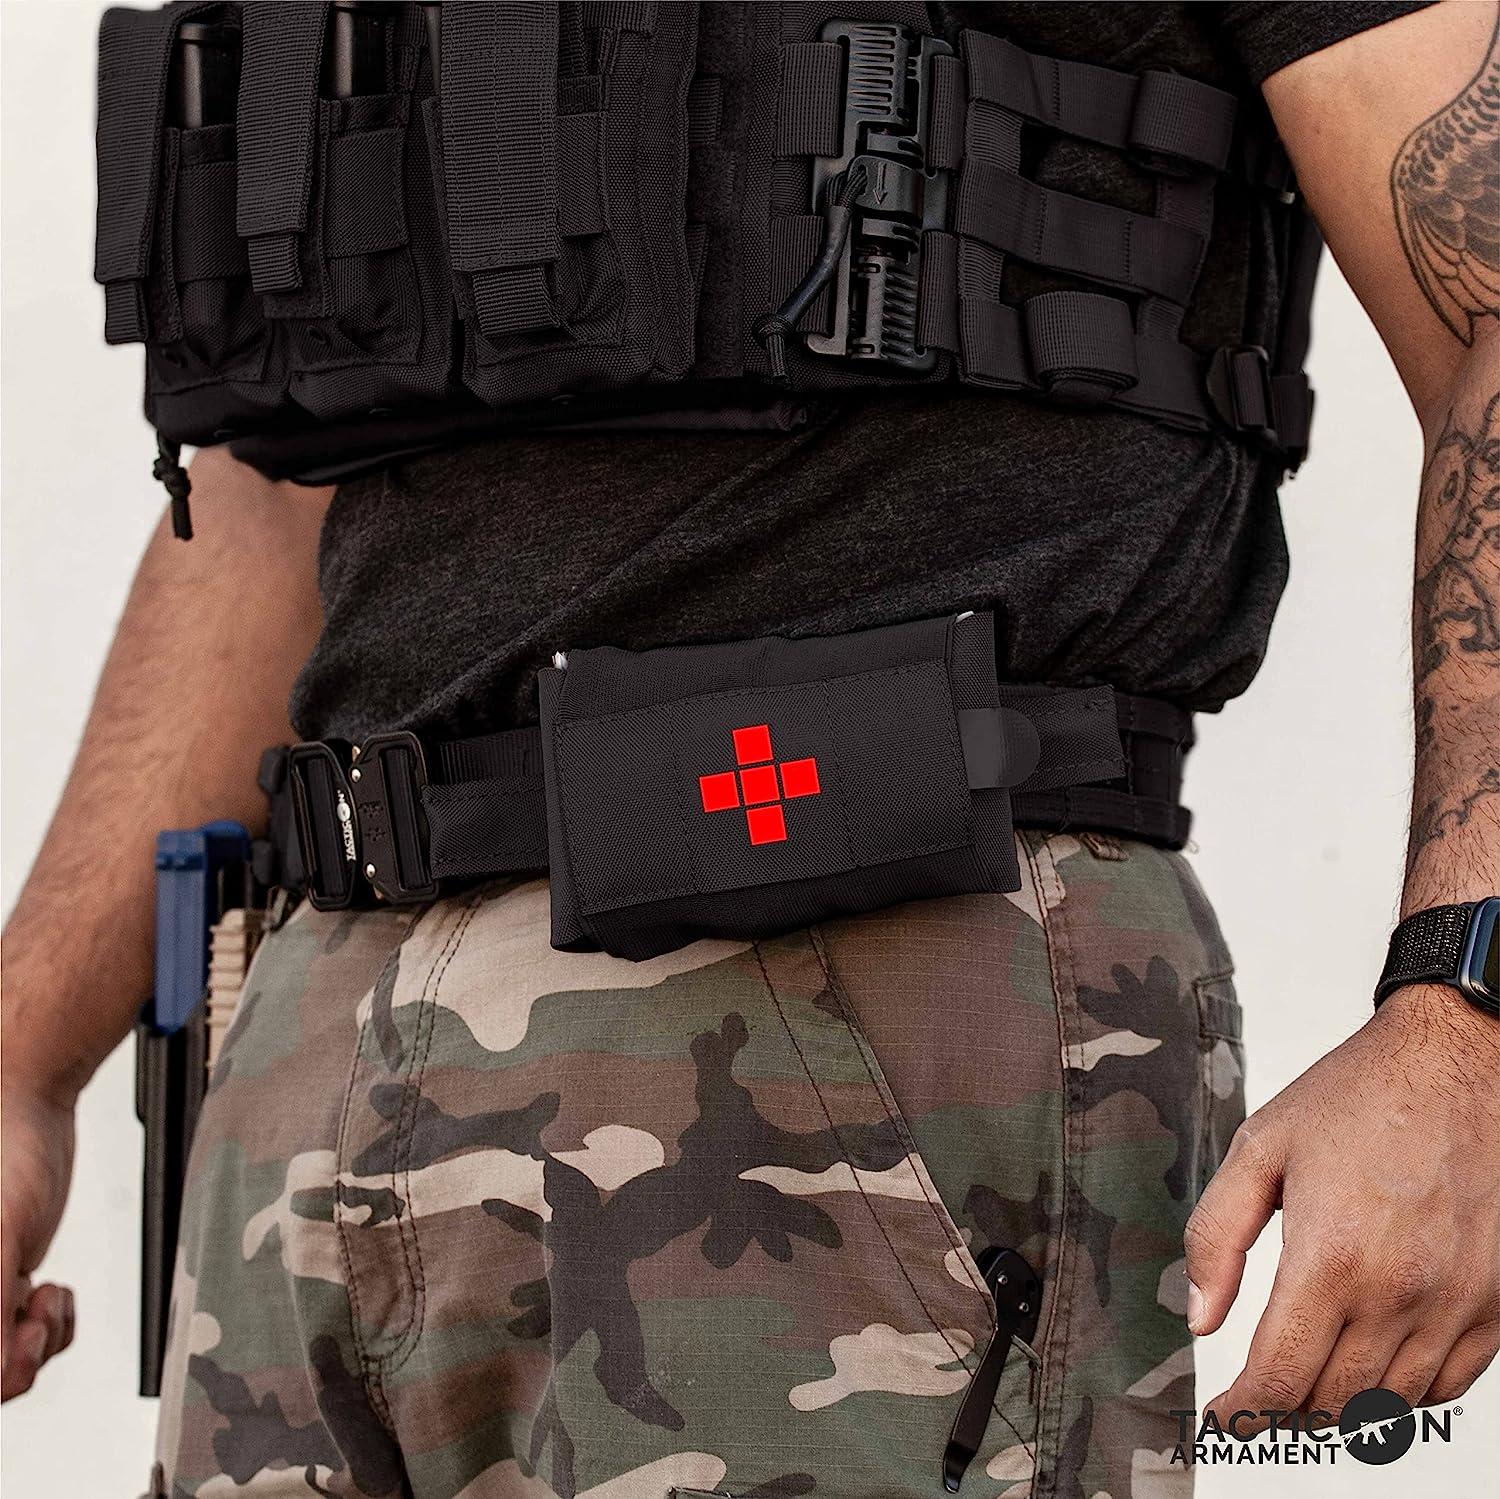 Molle Tactical Medical First Aid EDC Pouch Gear Waist bag Pocket